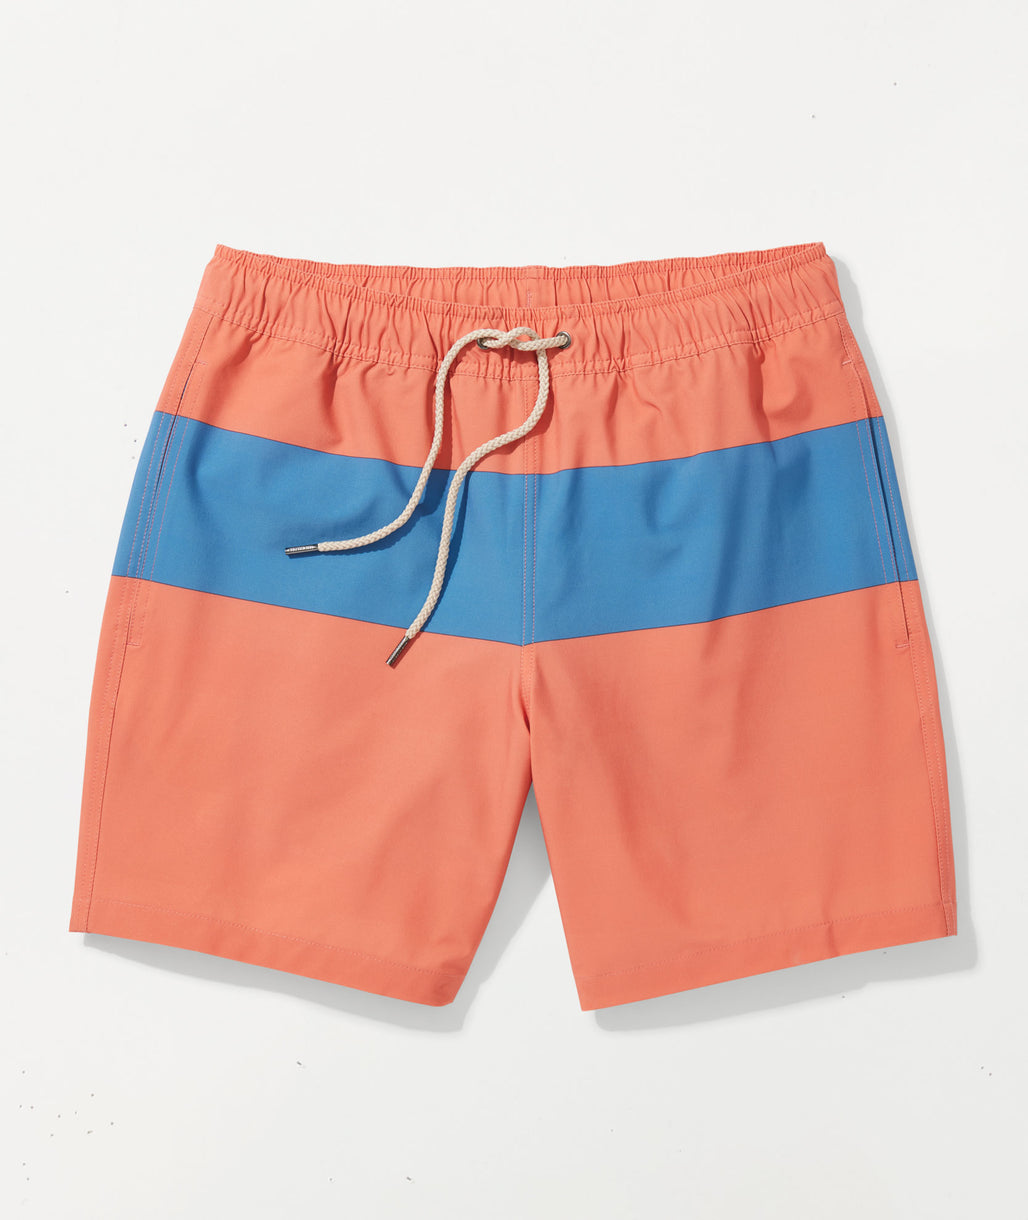 Limited Edition Bayberry Swim Trunks